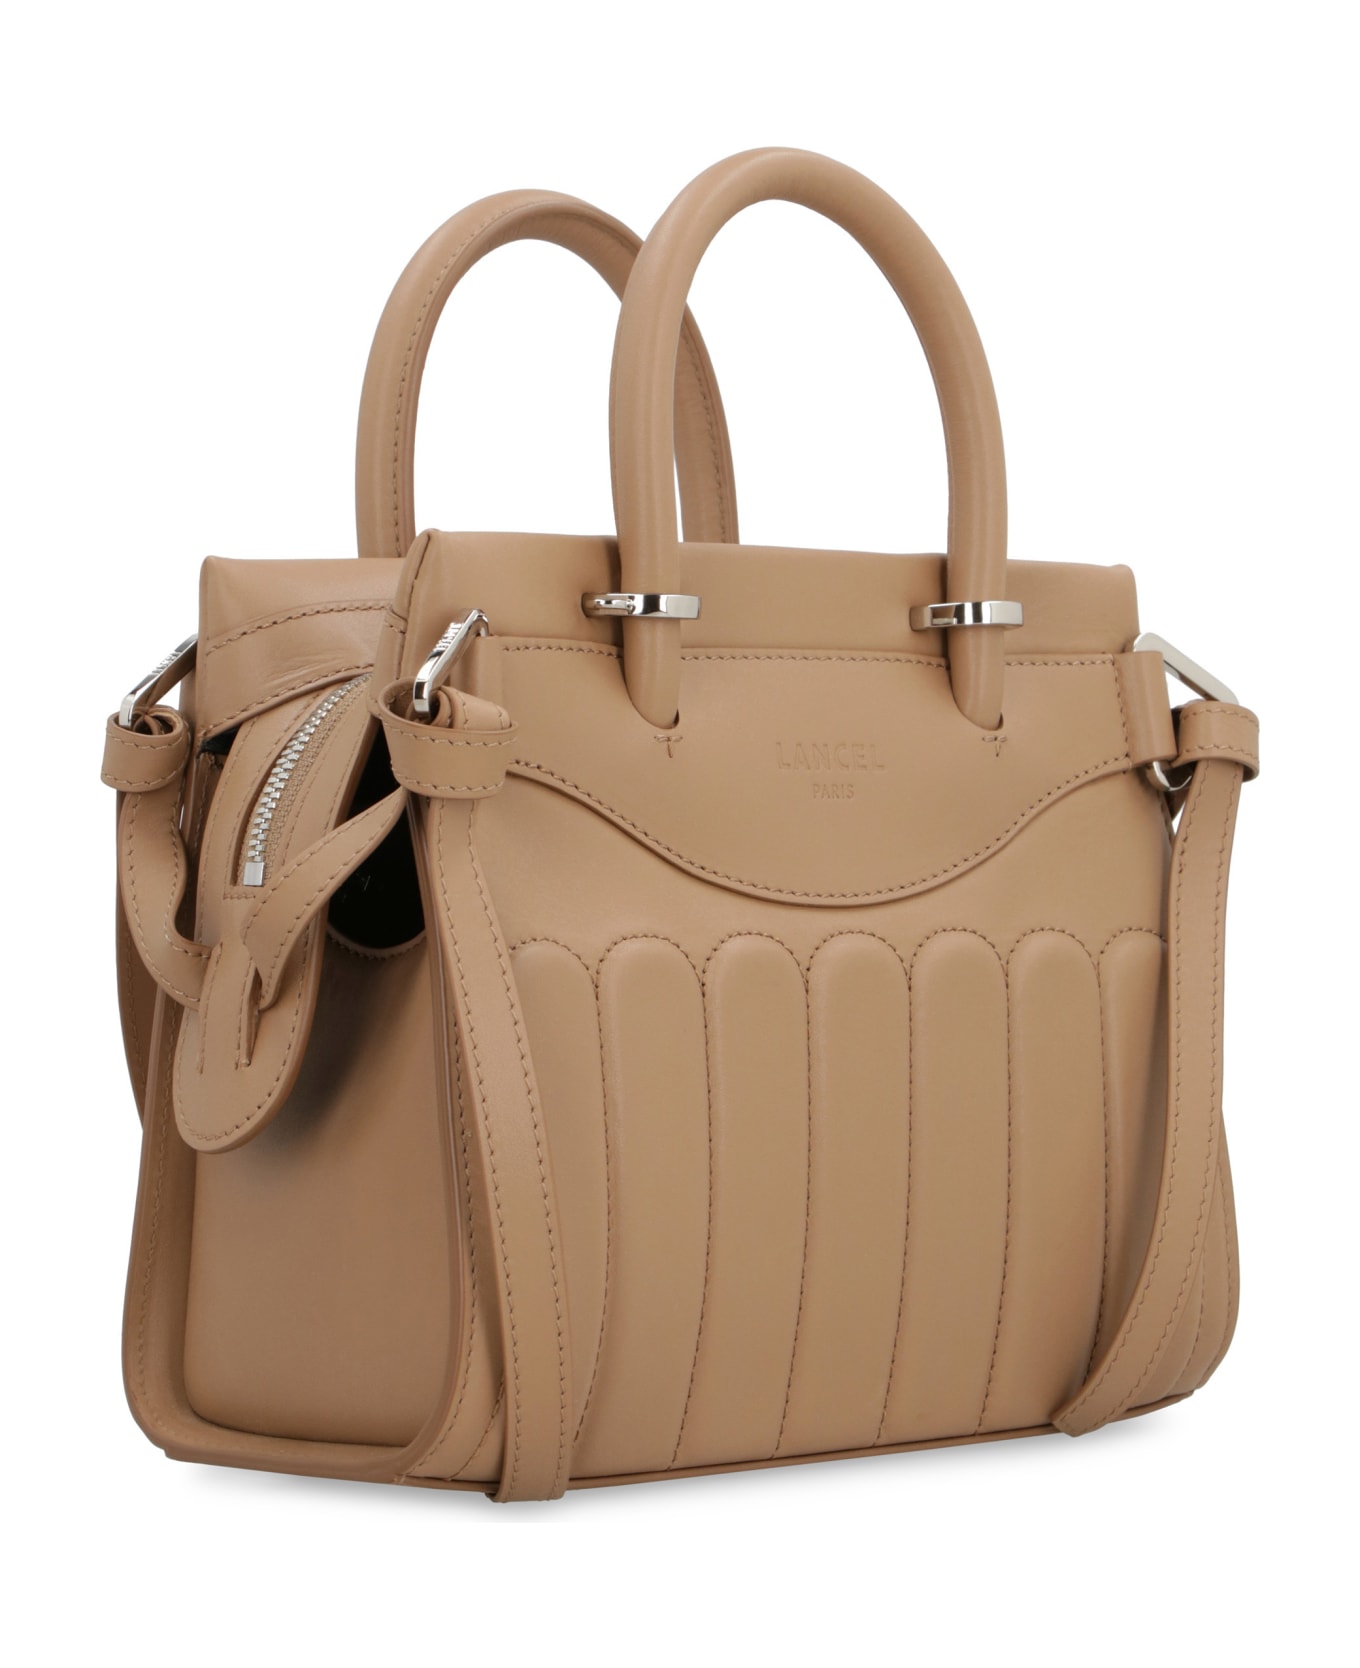 Lancel Rodeo Leather Tote - Camel トートバッグ